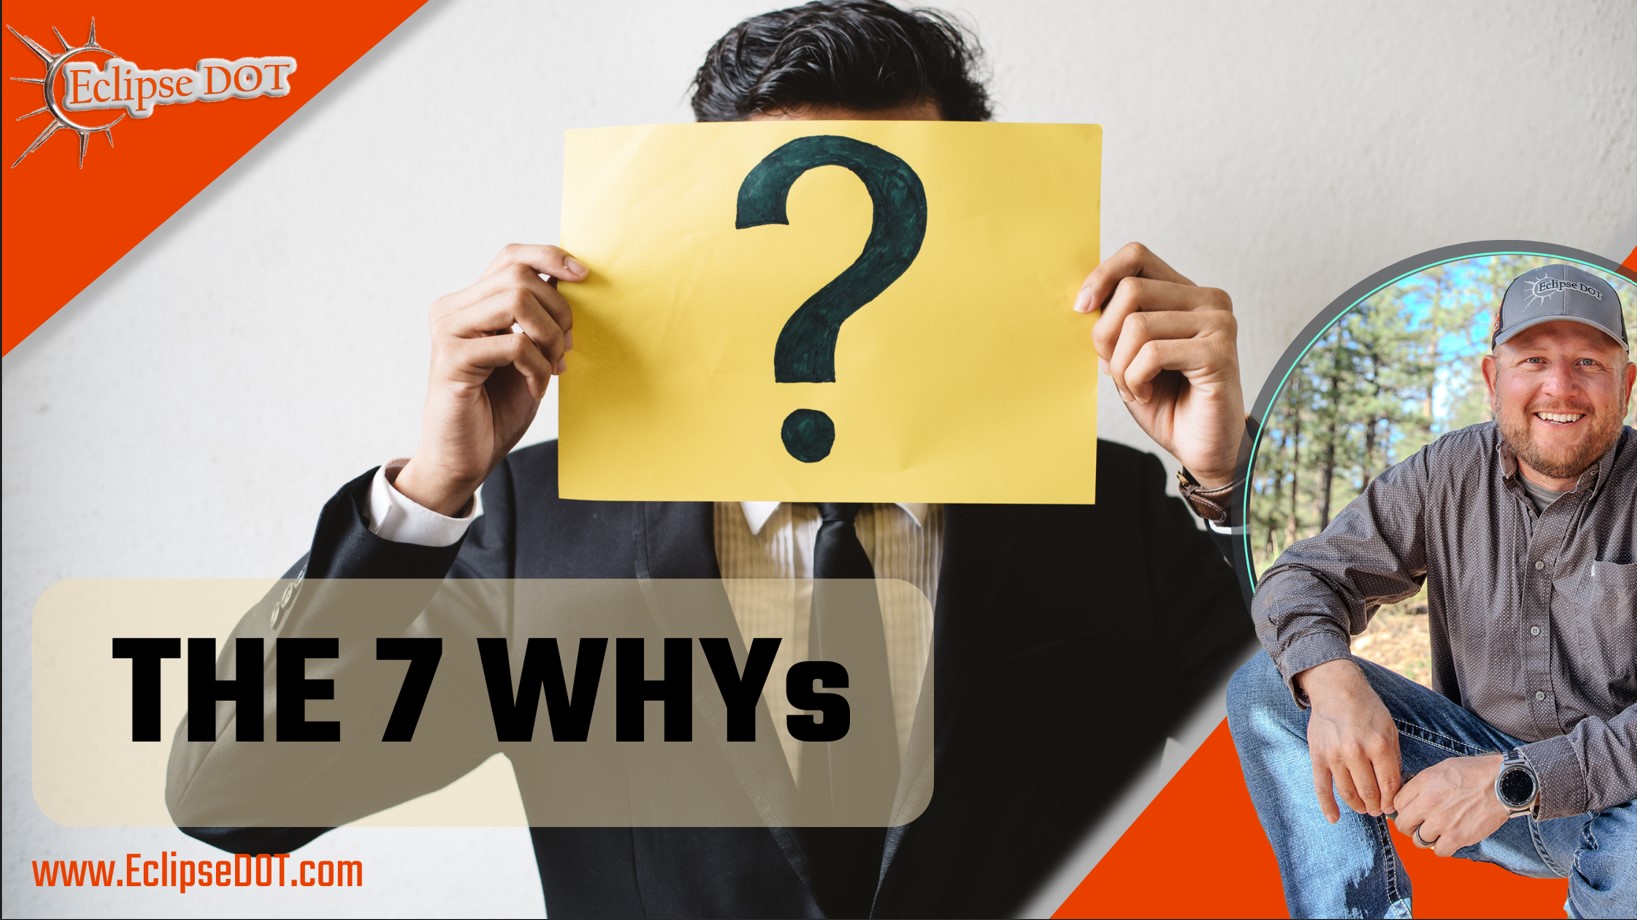 The 7 Whys: Exploring the Power of Asking 'Why' for Deeper Understanding.